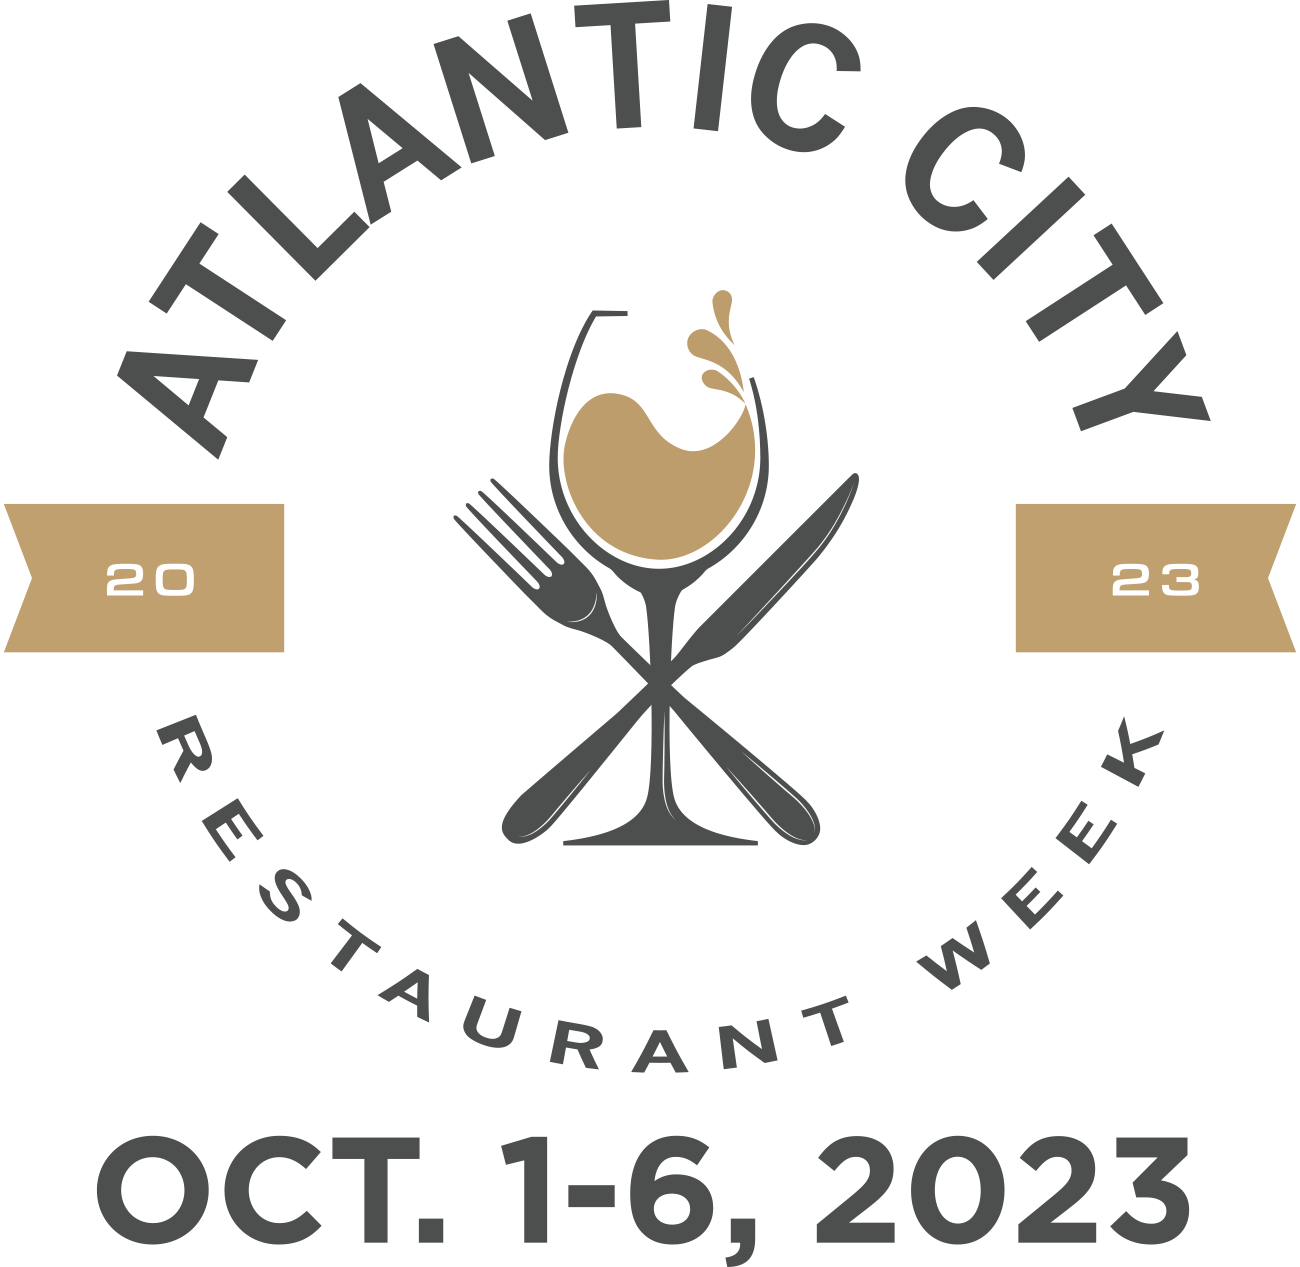 Atlantic City Restaurant Week Returns With Really Delicious Dining